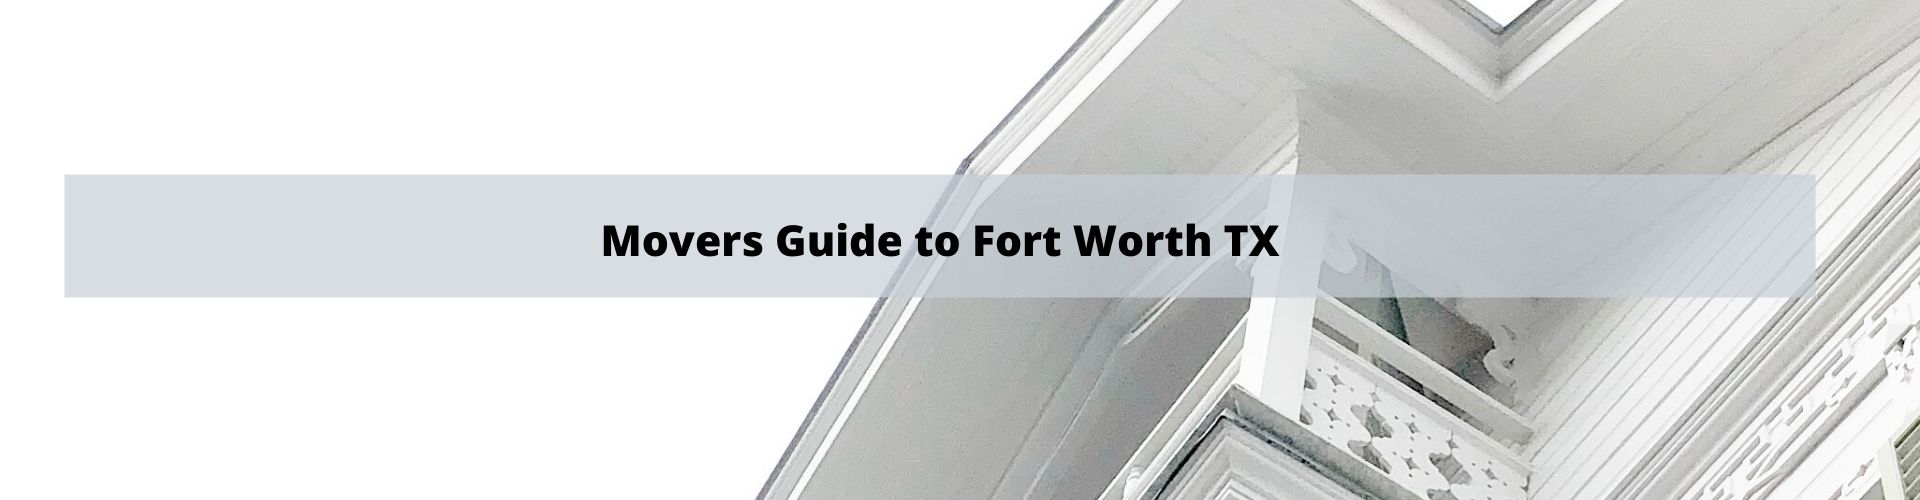 Mover's Guide to Fort Worth TX